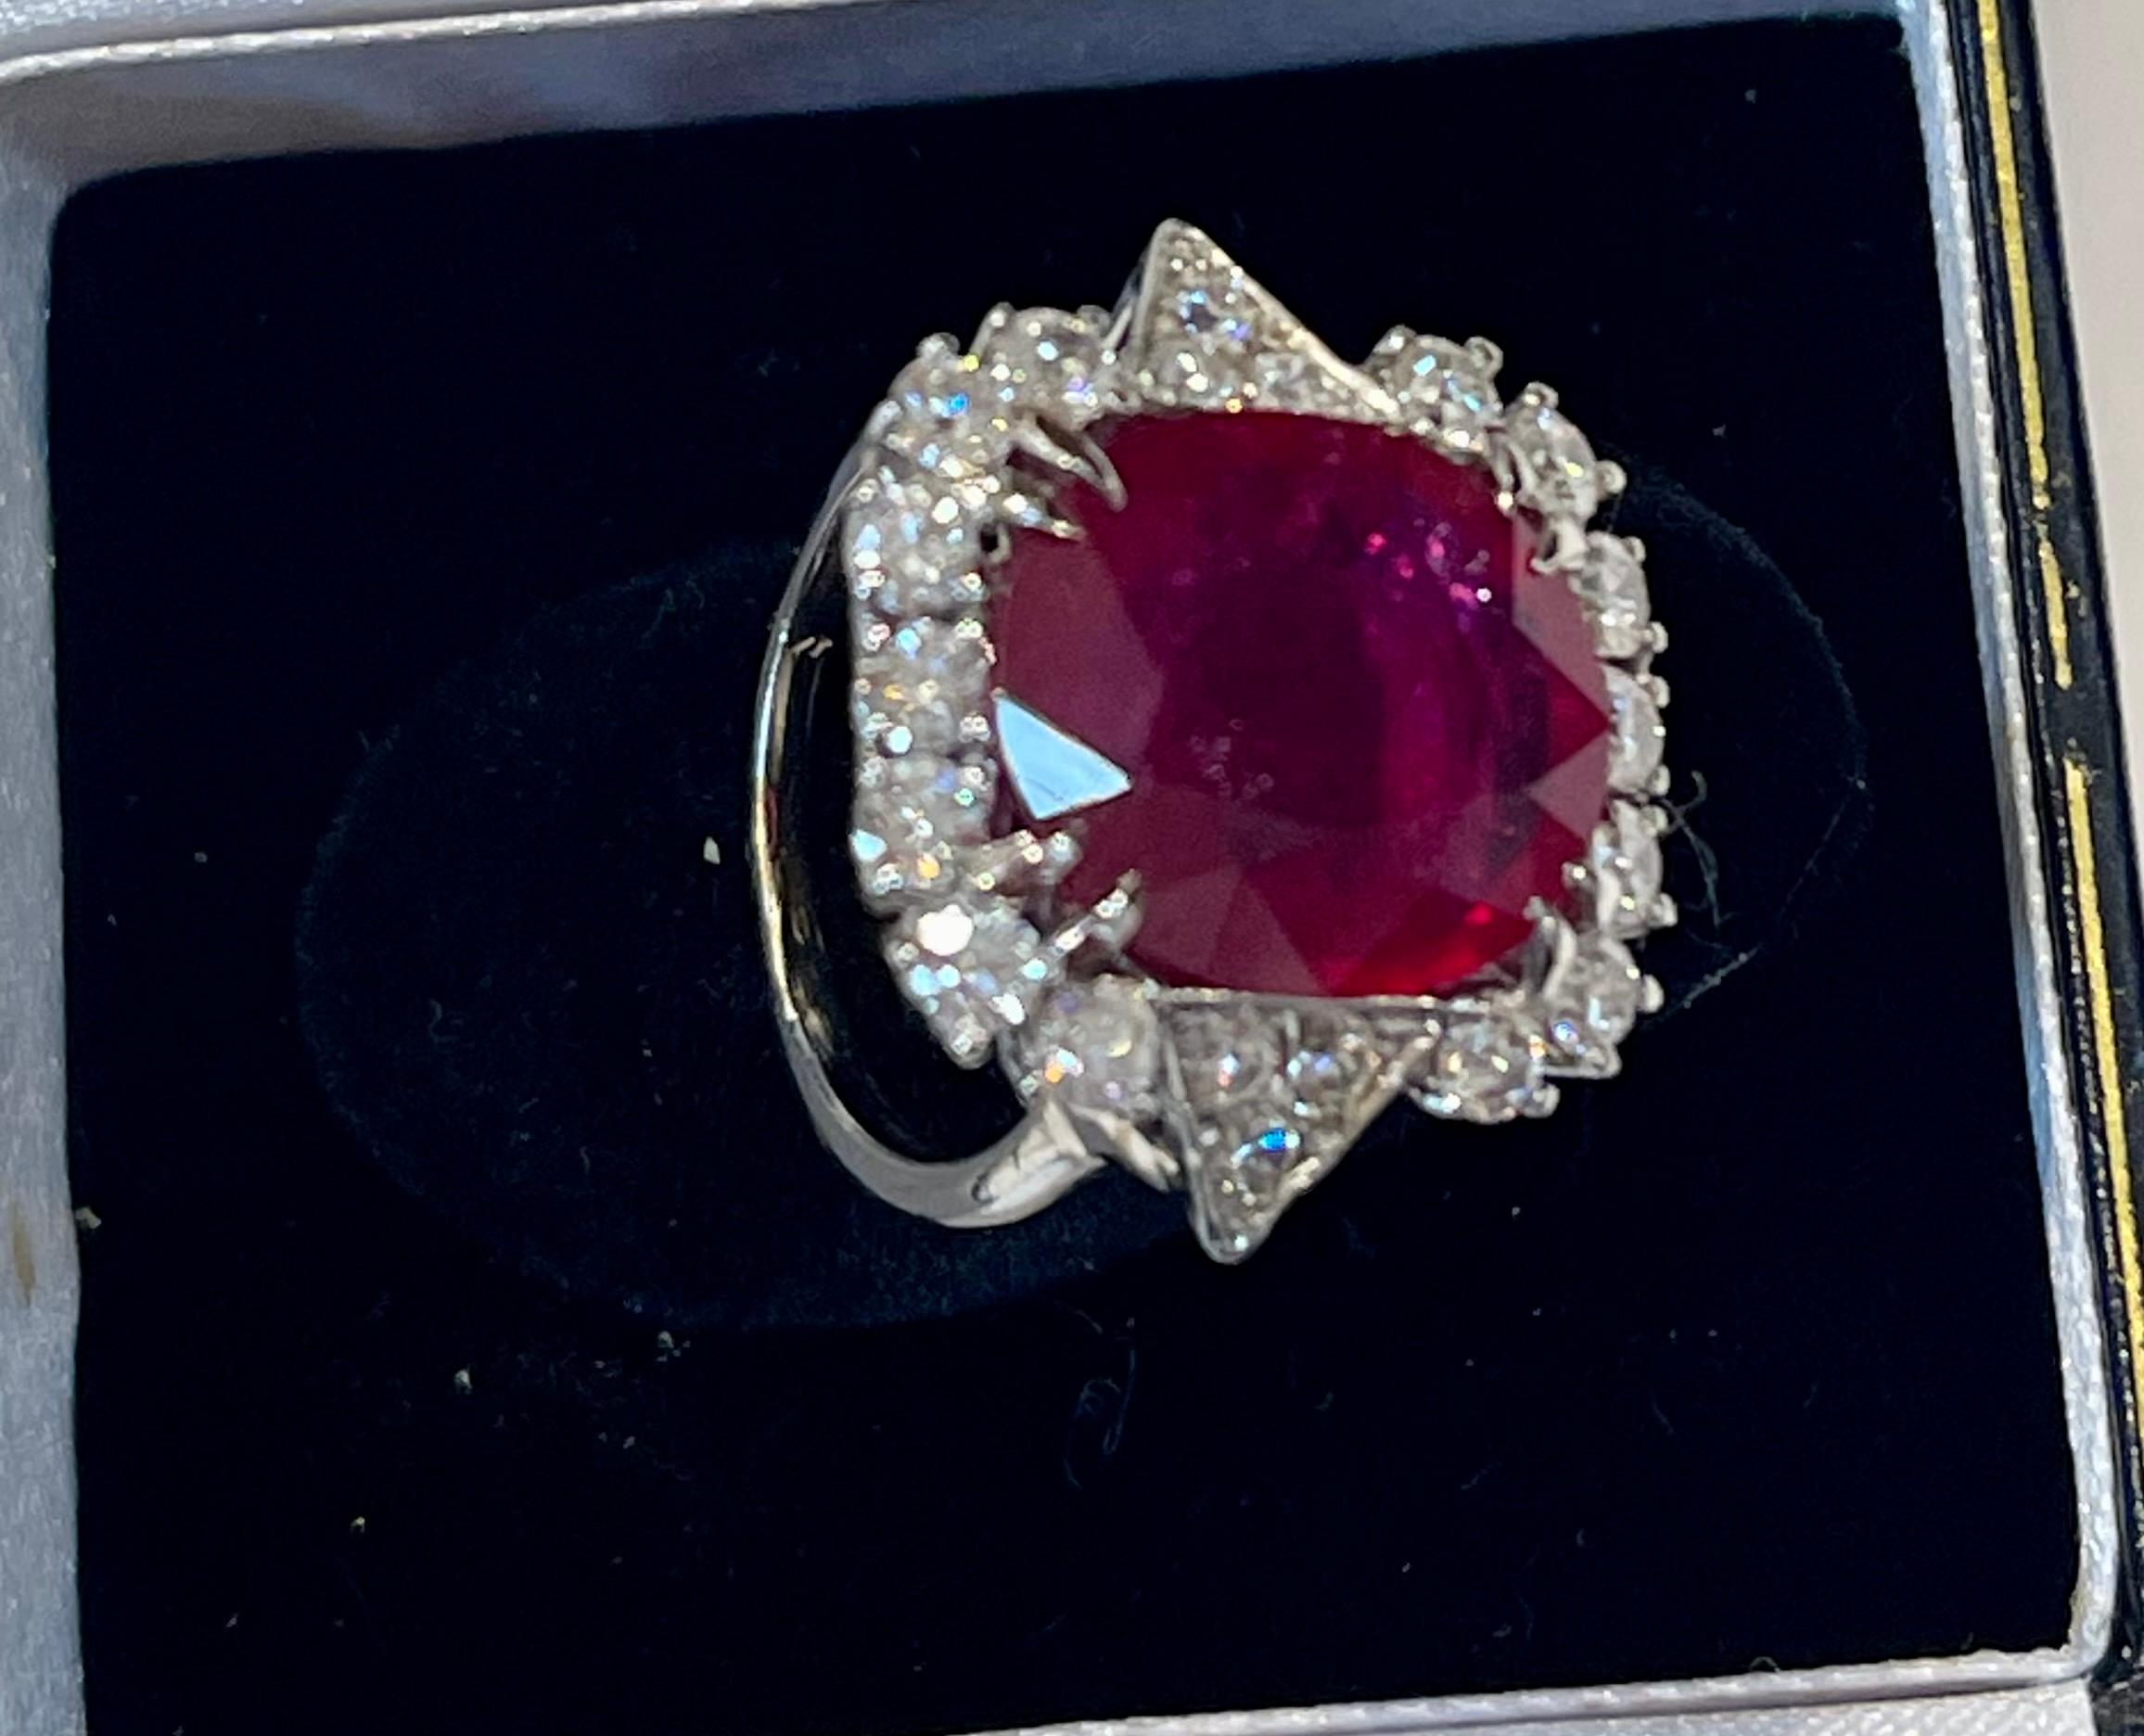 Vintage 12 Carat Emerald Cut Treated Ruby and Diamond Ring in Platinum 9